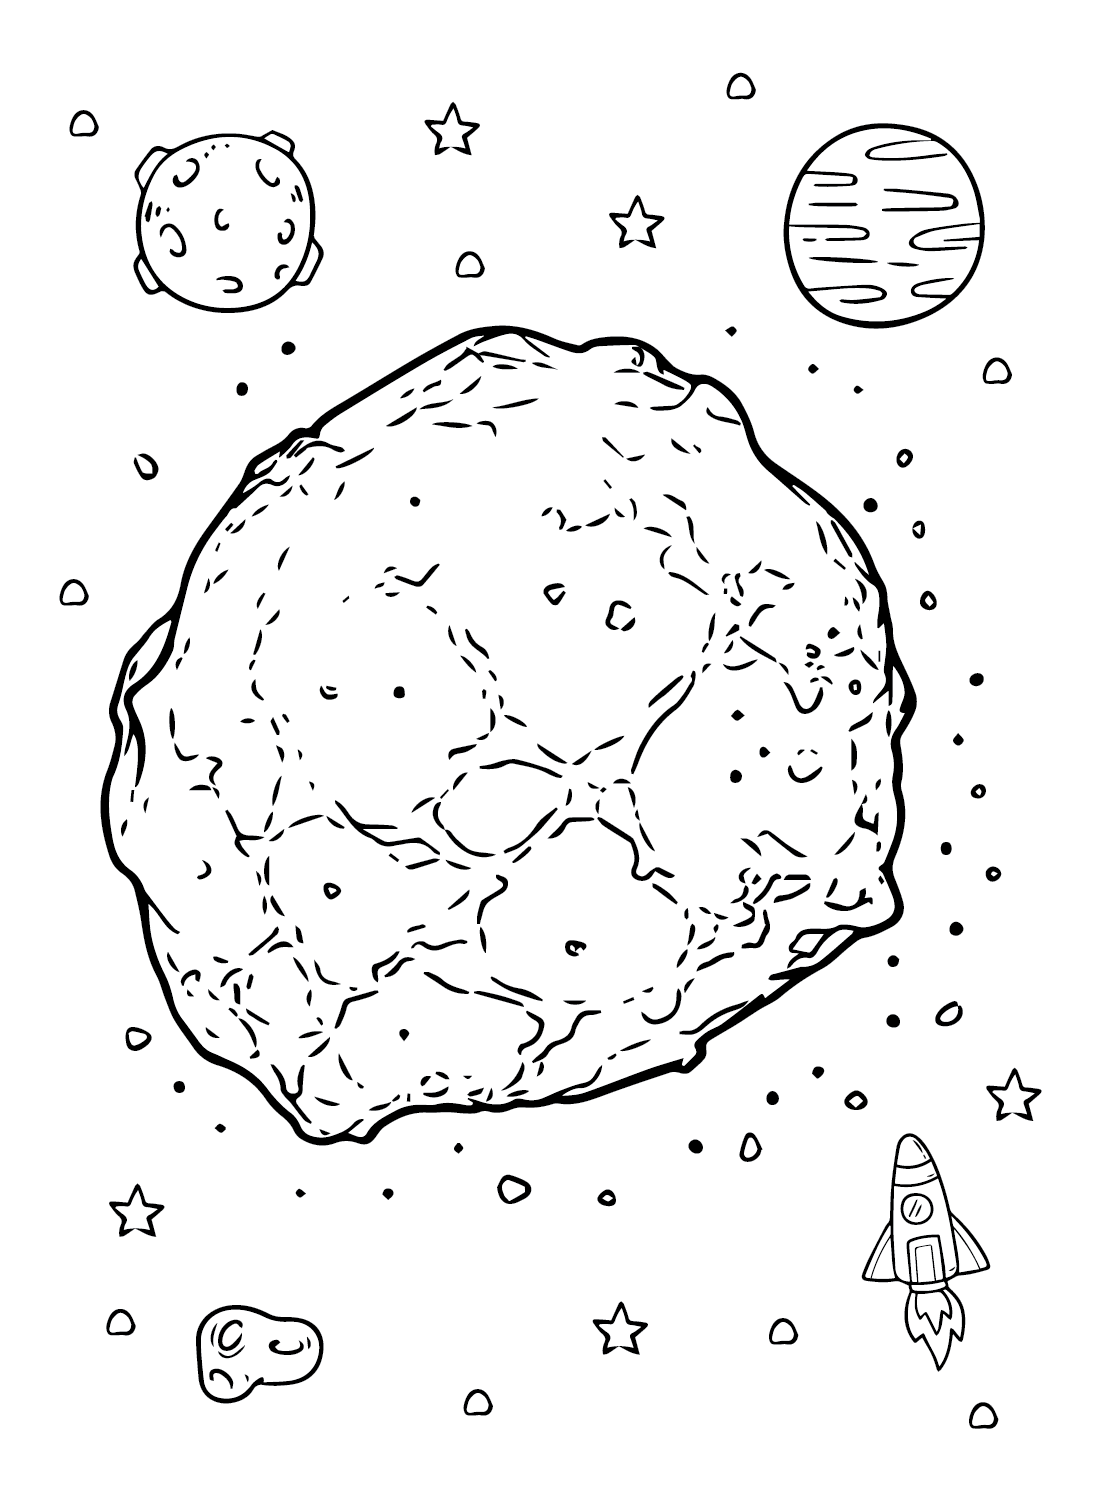 Asteroid Doodle from Asteroid